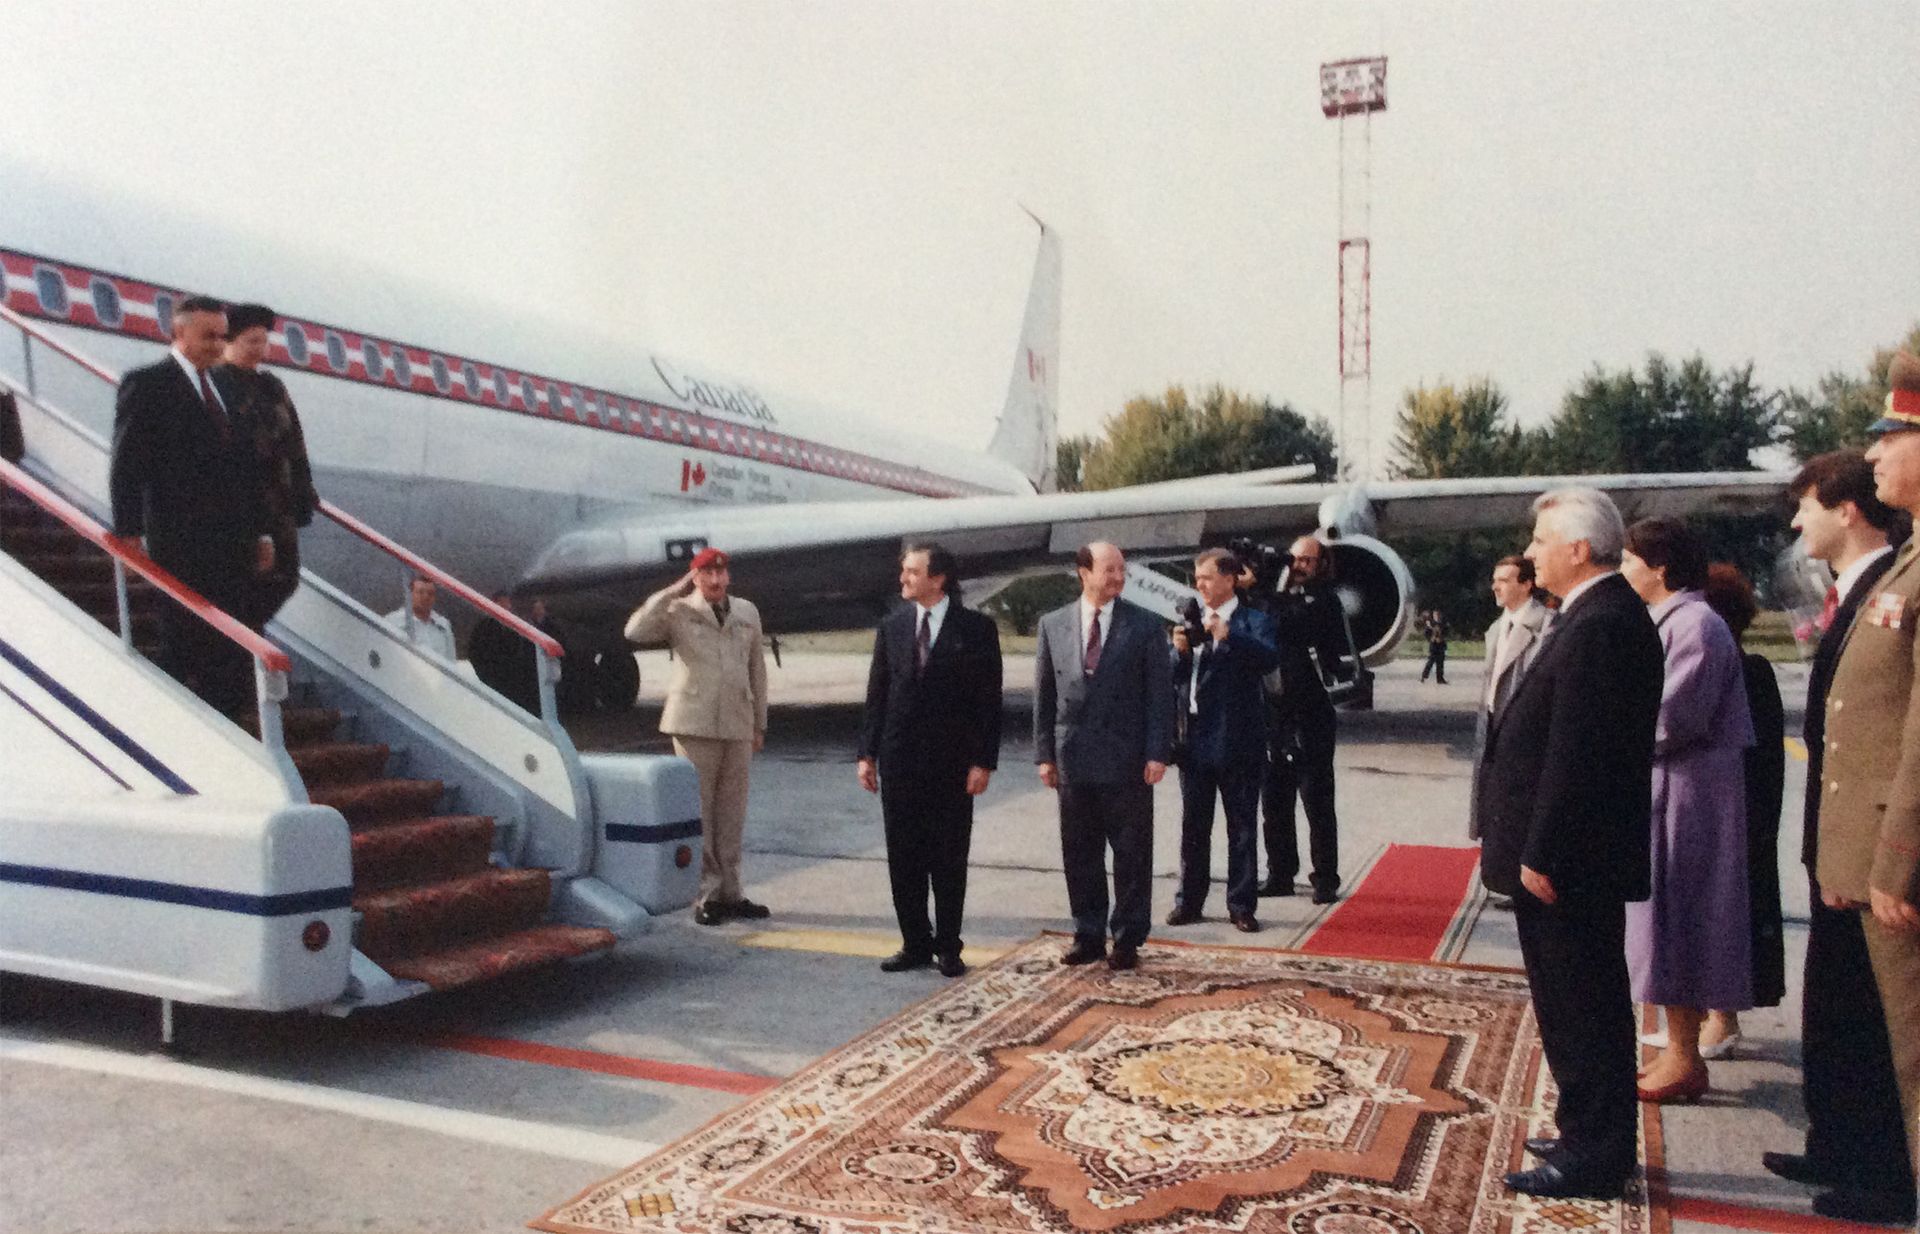 Former Canadian governor general Raymond Hnatyshyn (left) arriving in Ukraine during a state visit in 1992 Courtesy the Hnatyshyn Foundation